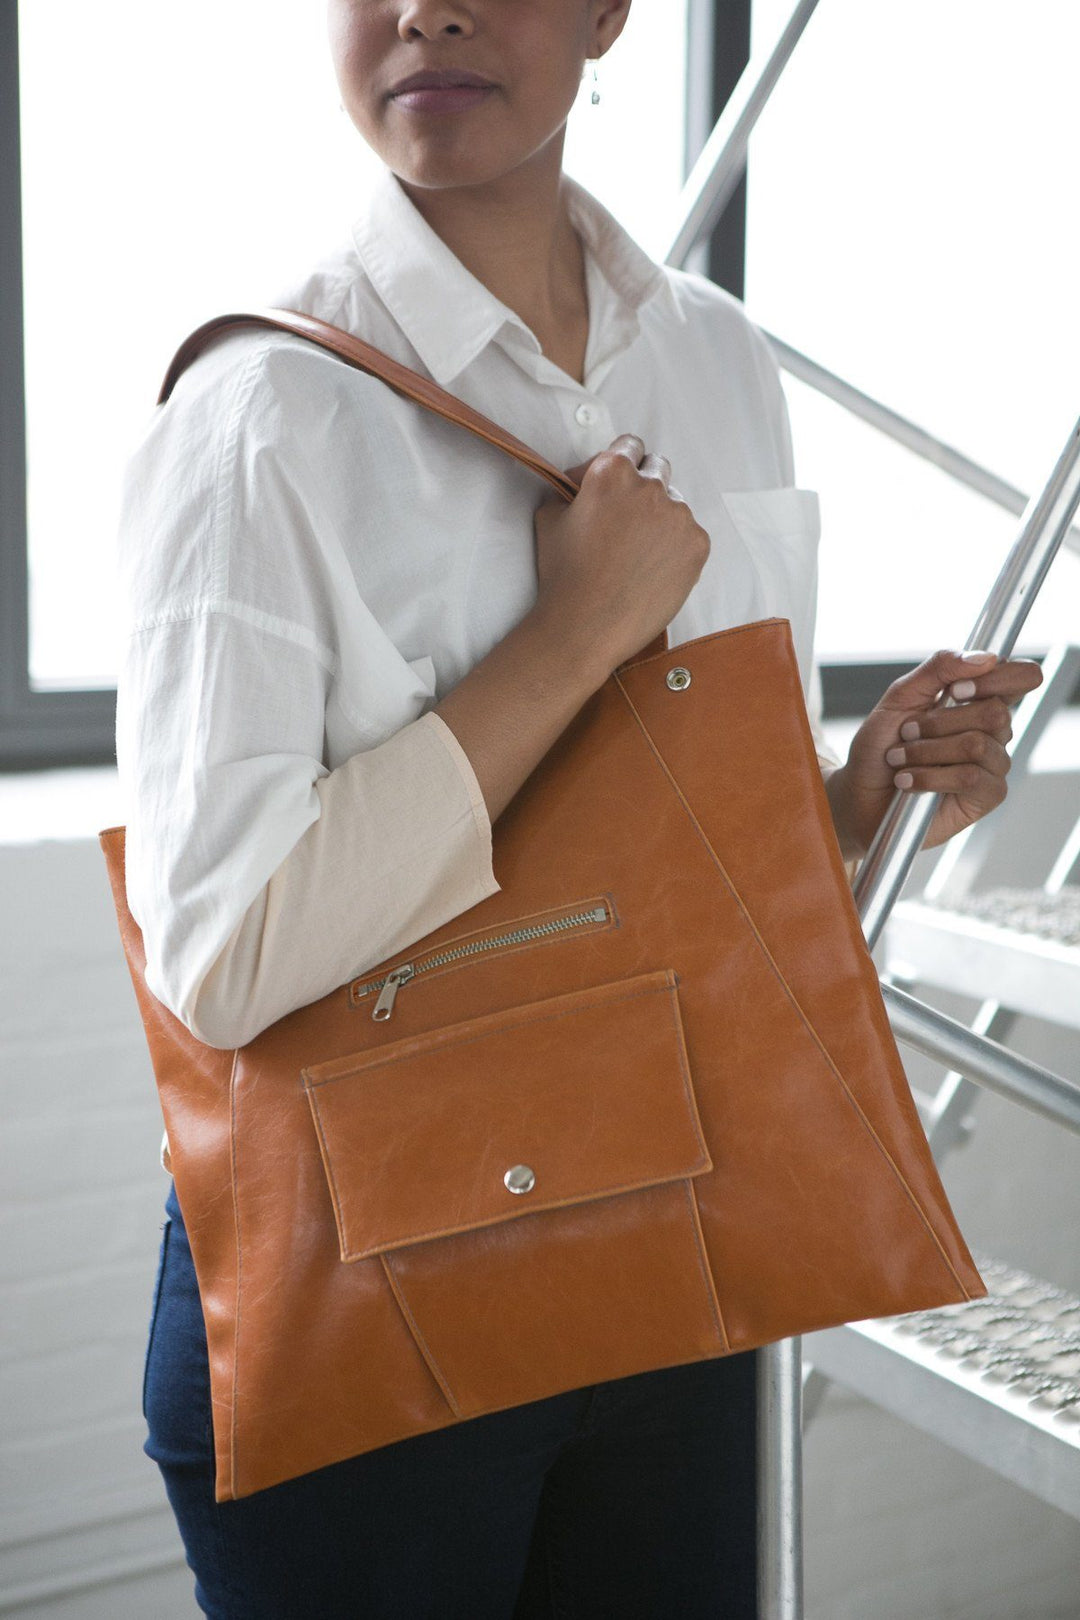 Womens Tote Bag - Metier Tote - Butterscotch vegan tote made in usa